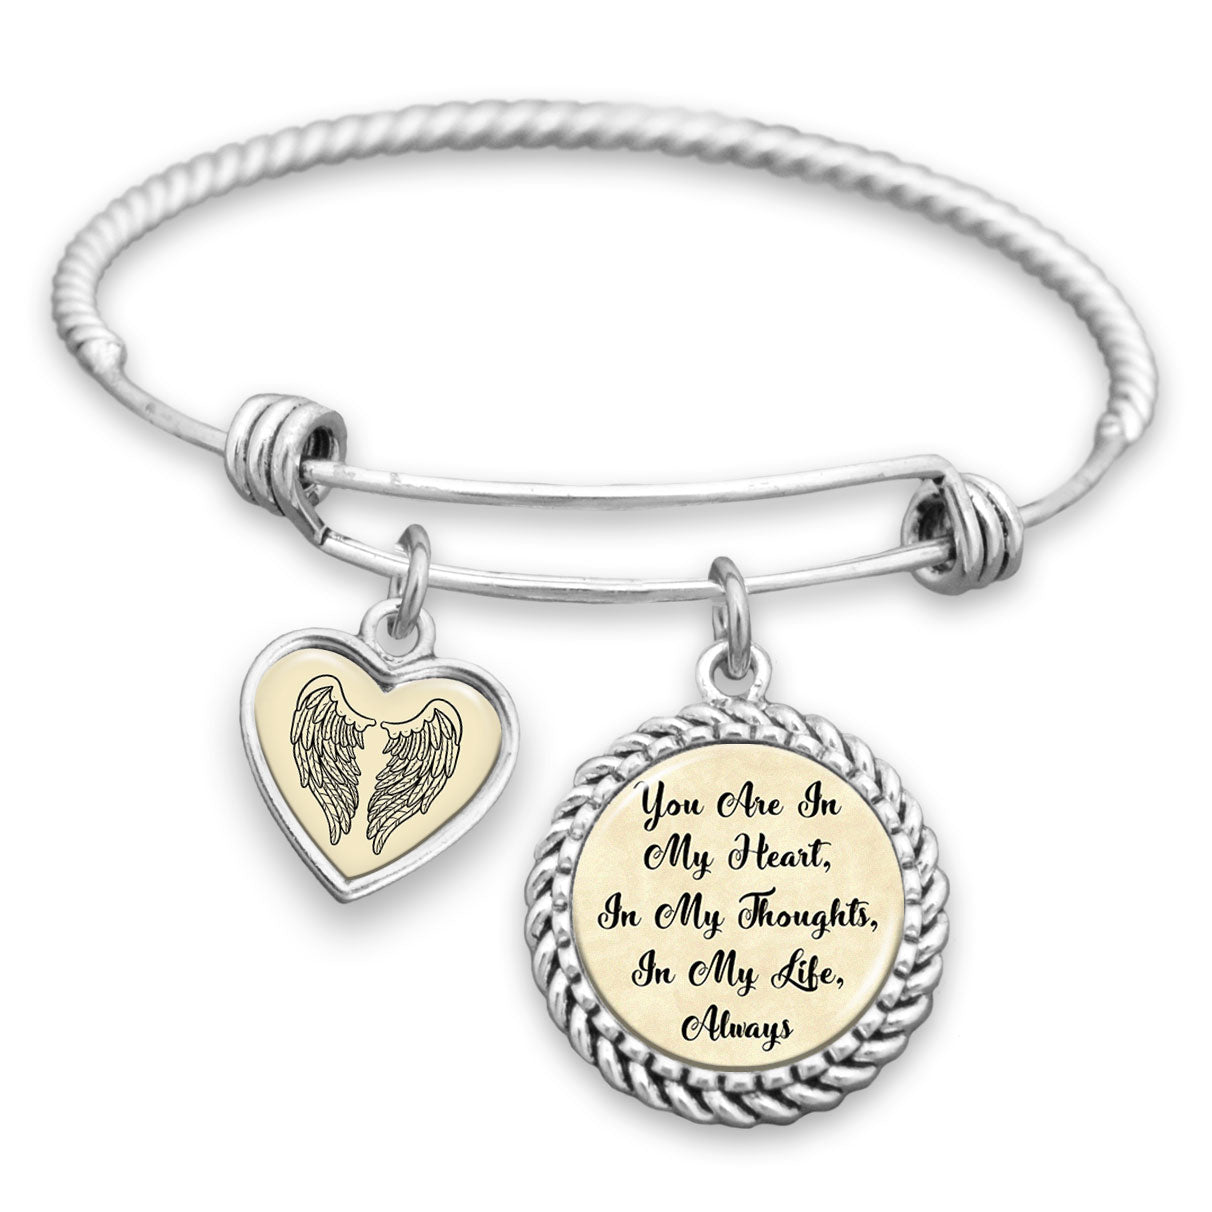 You Are In My Heart, In My Thoughts, In My Life, Always Charm Bracelet